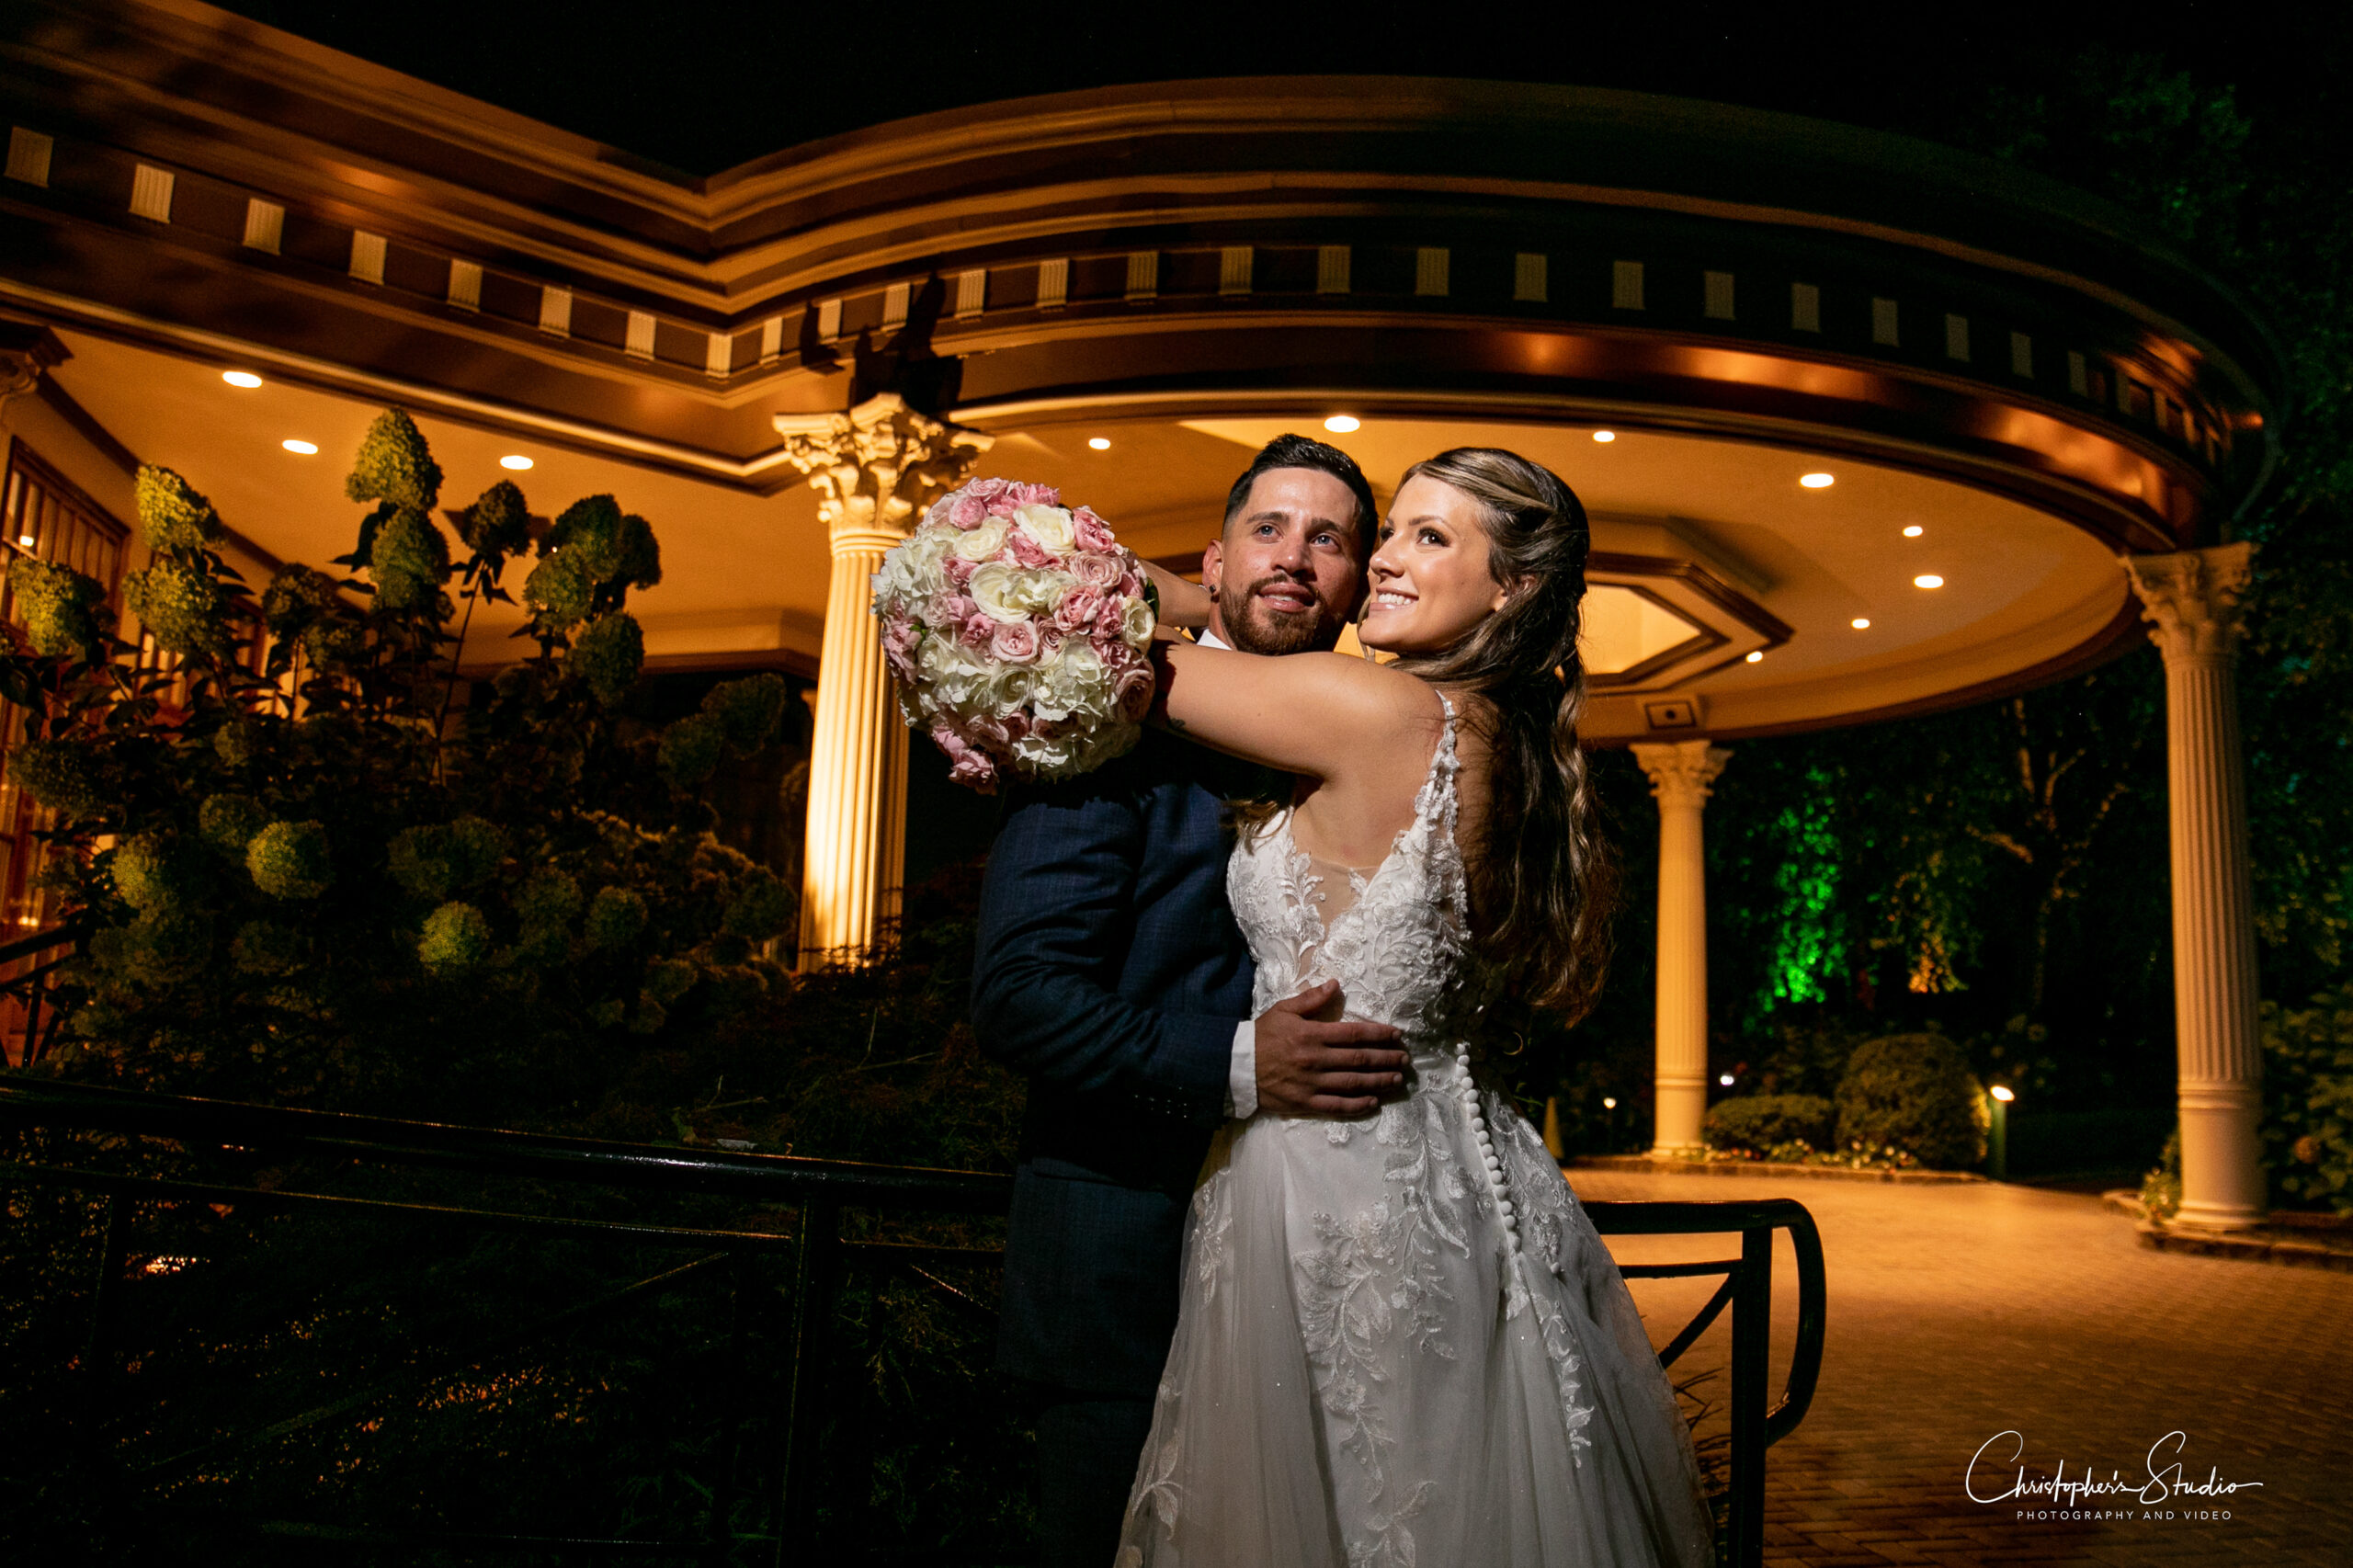 An evening walk outside the VIP Country Club in Westchester, NY. for the bride and groom.